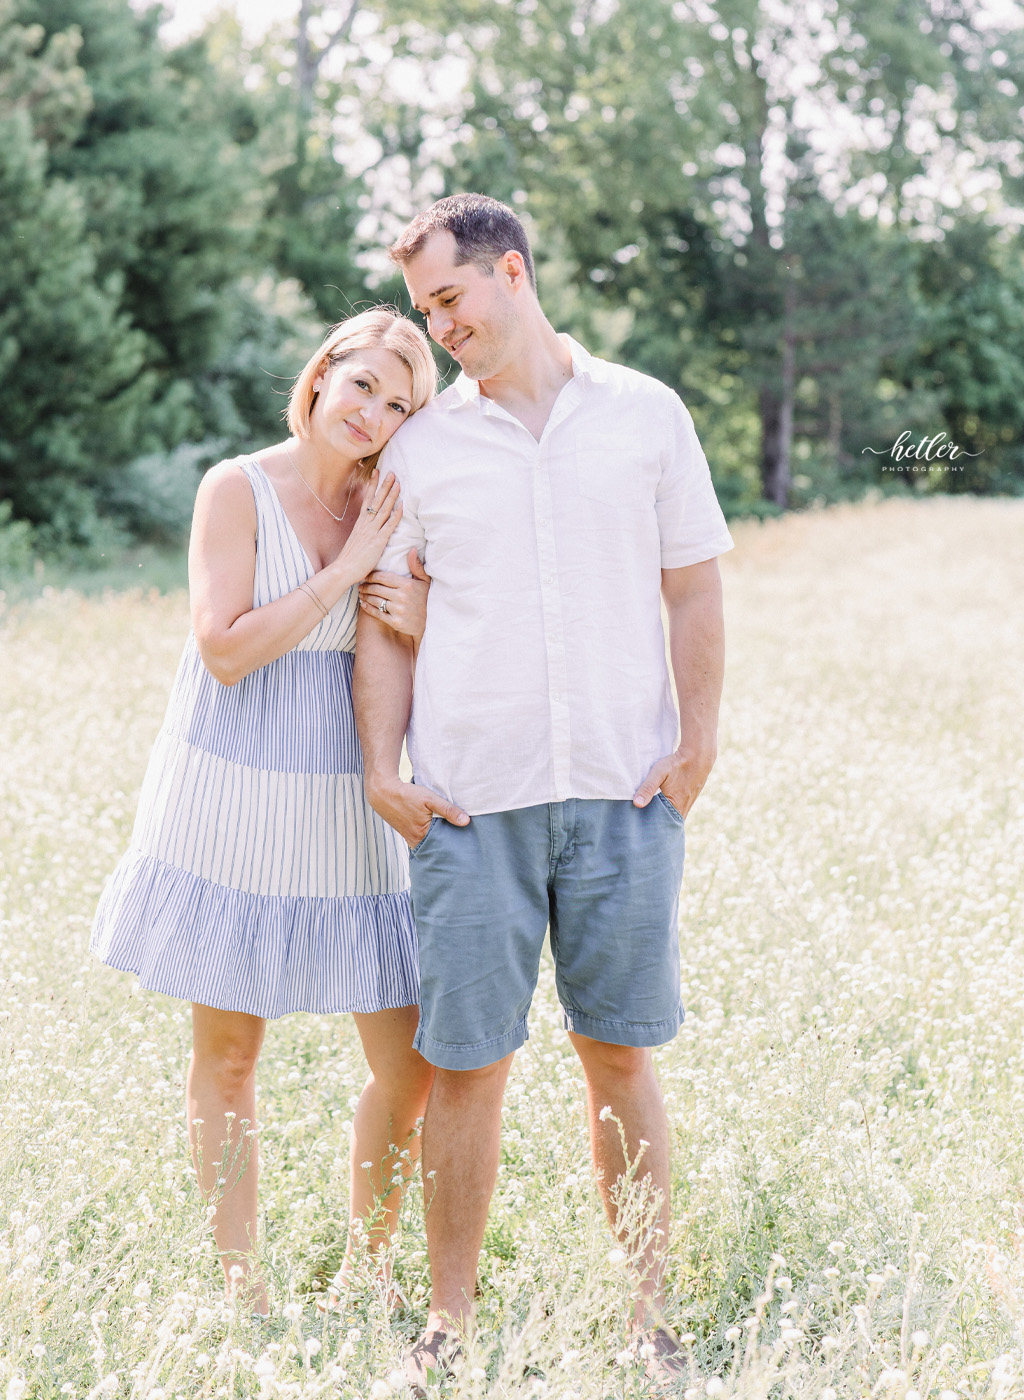 Fremont Michigan family photo session in a field of wildflowers